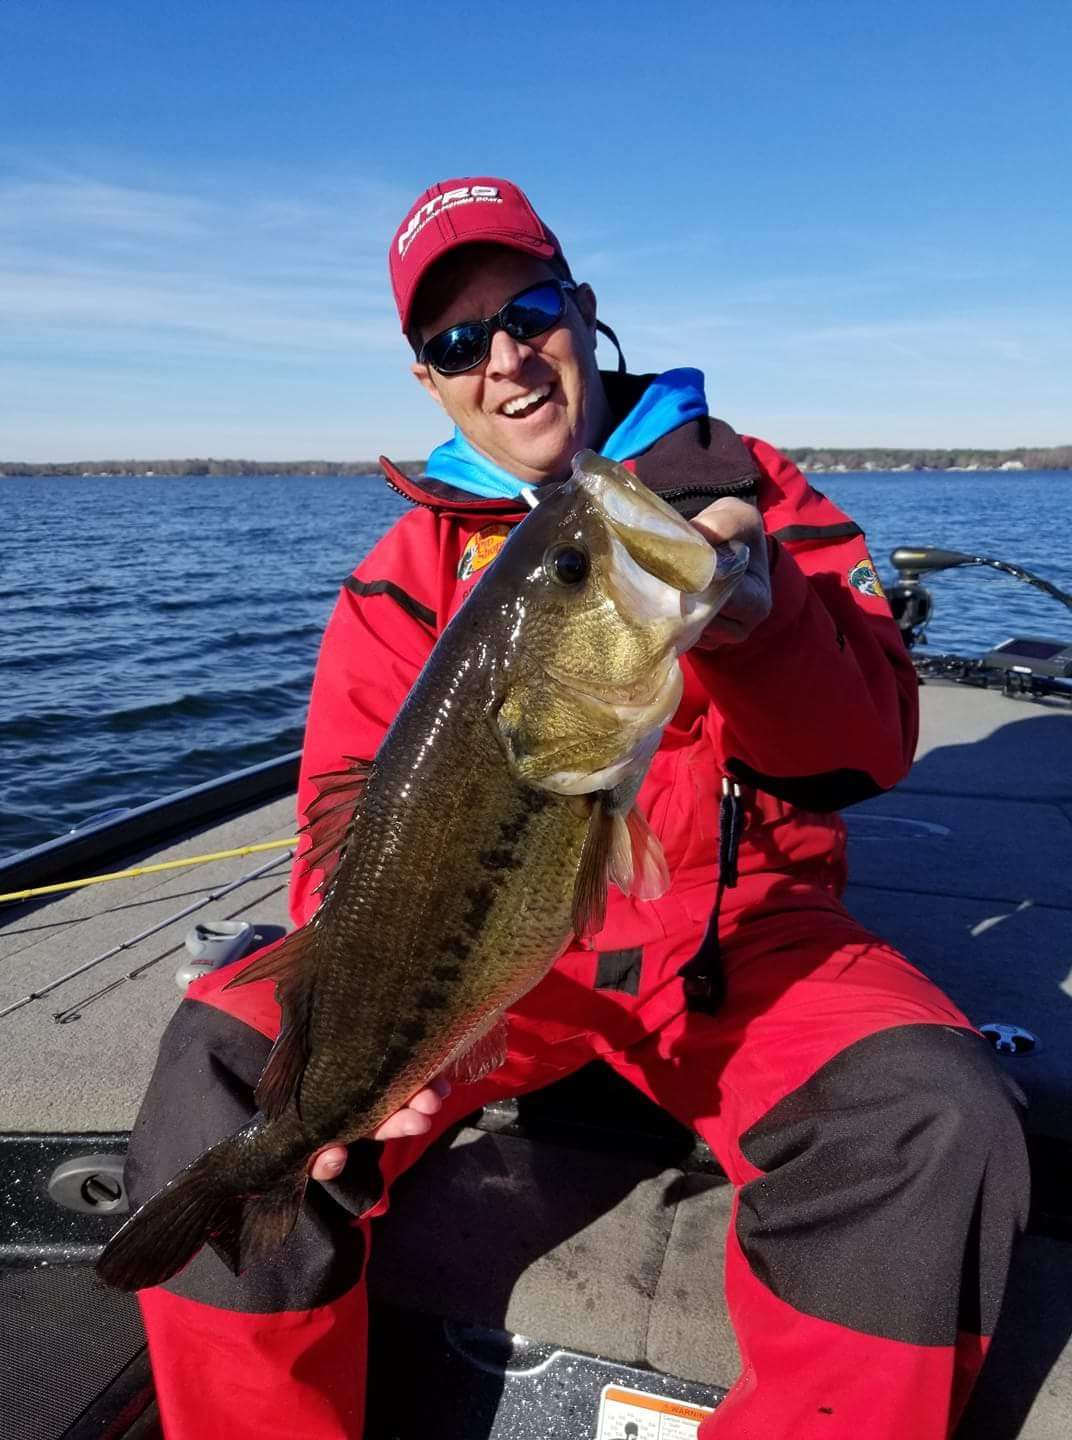 Wendy Rudd Smith shared this photo of Adam Smith. He caught this 8-2 at Lake Gaston on a 3/4oz Strike King Structure Jig with a Rage Craw trailer in 25' with 38 degree water temp.